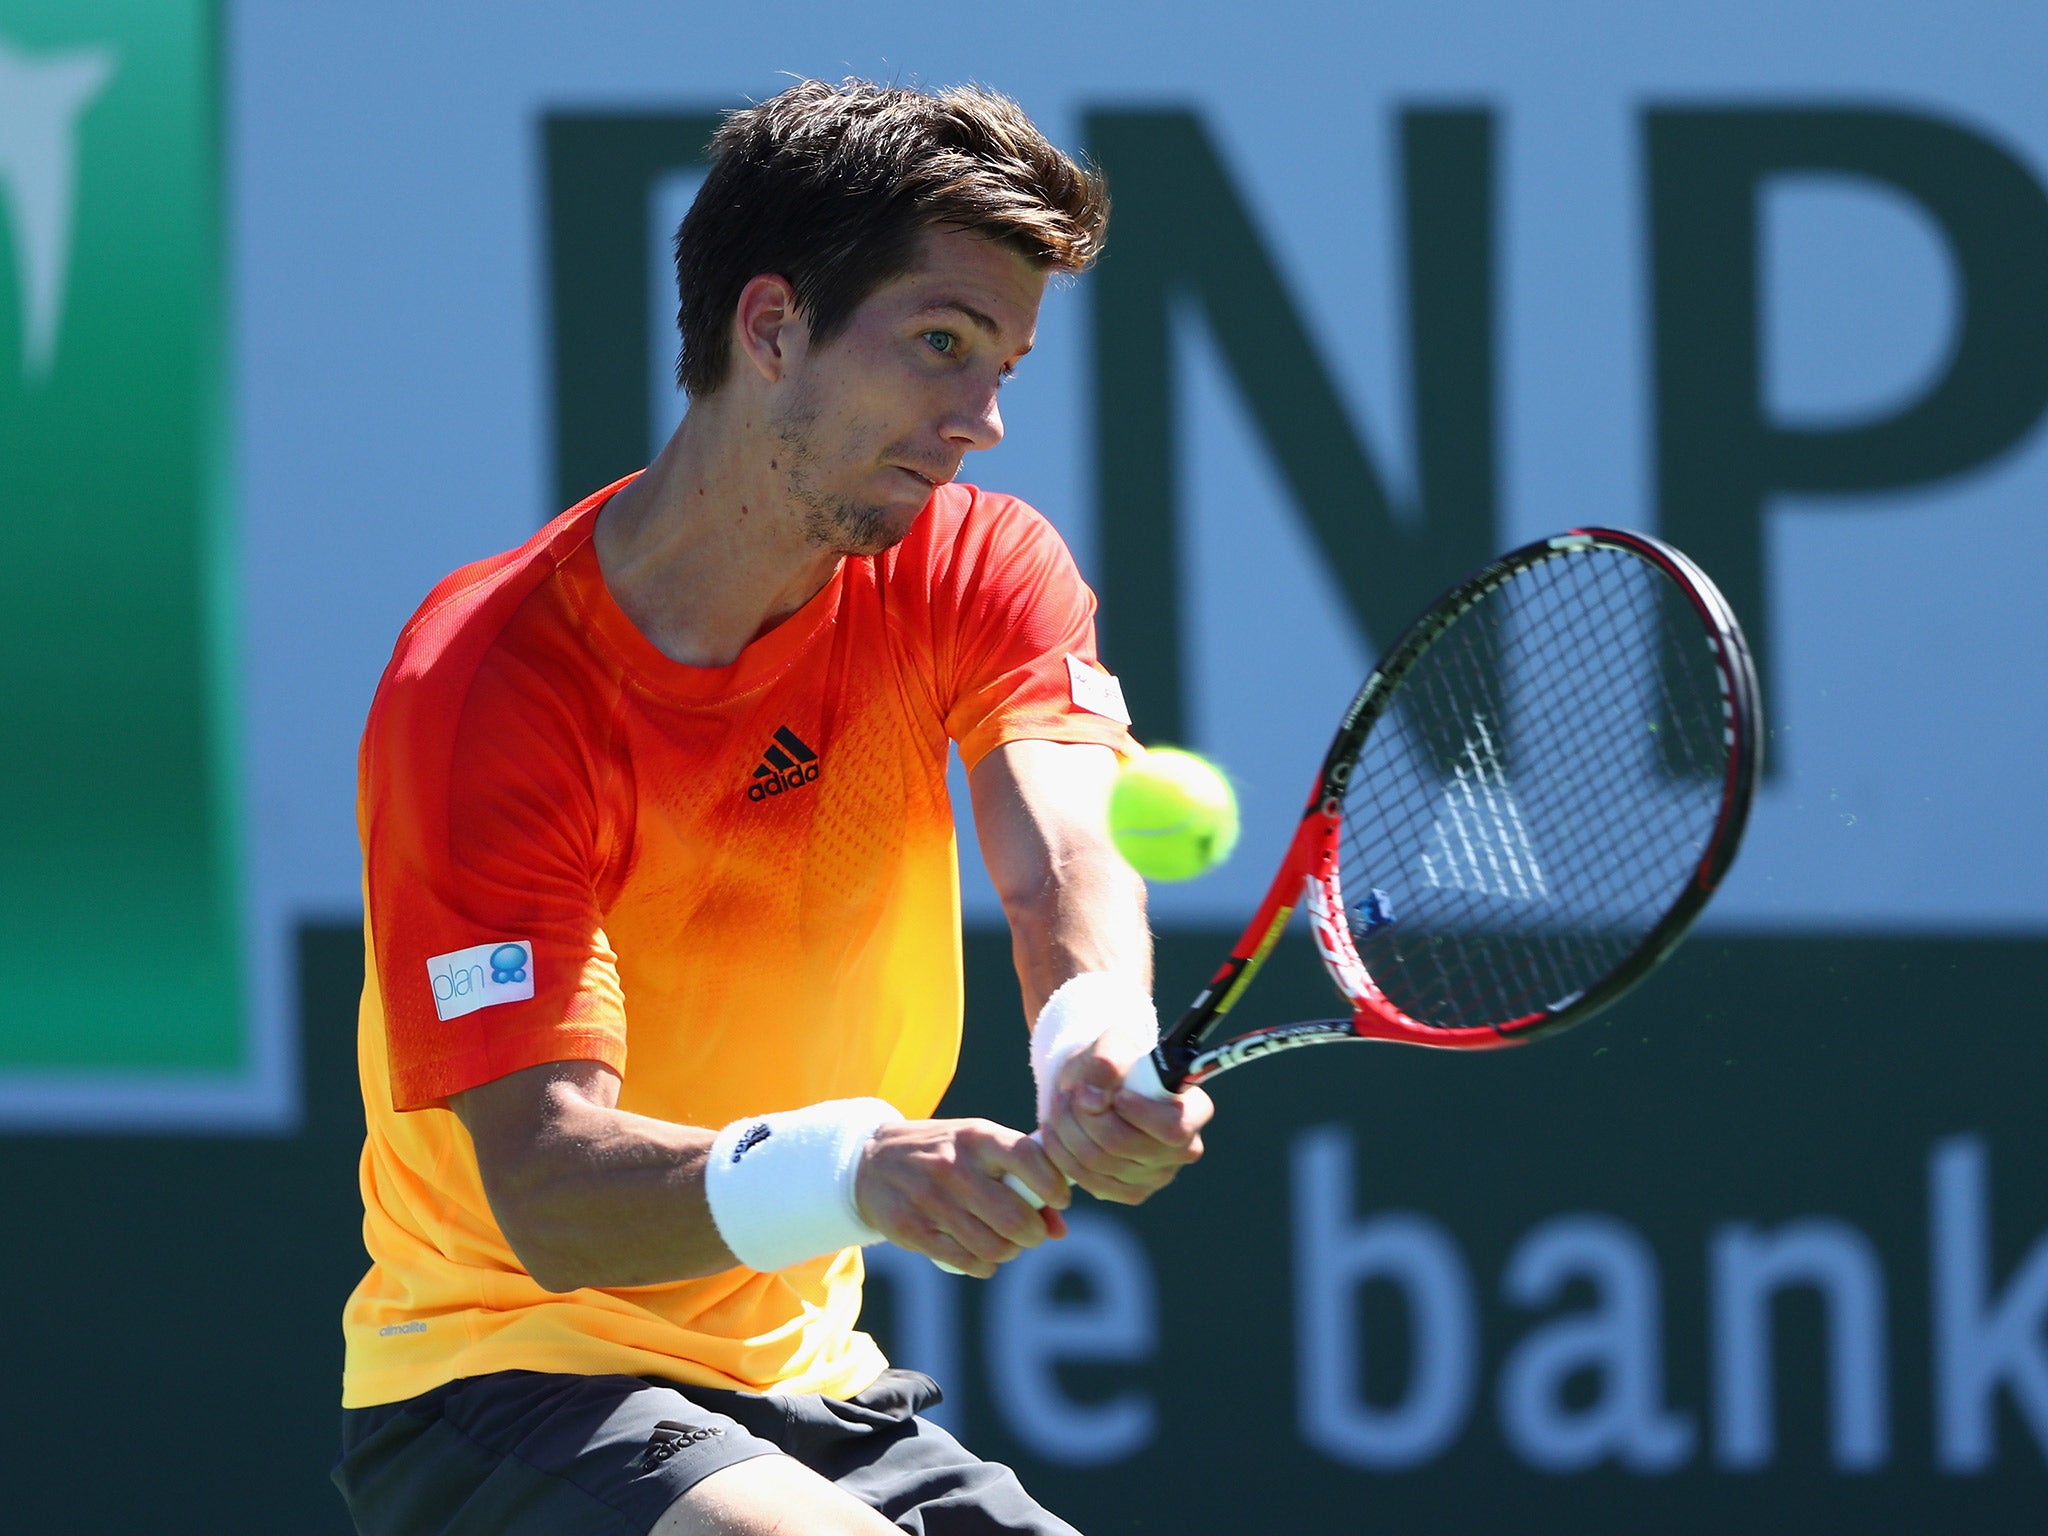 Bedene withdrew from the Miami Open citing a wrist injury